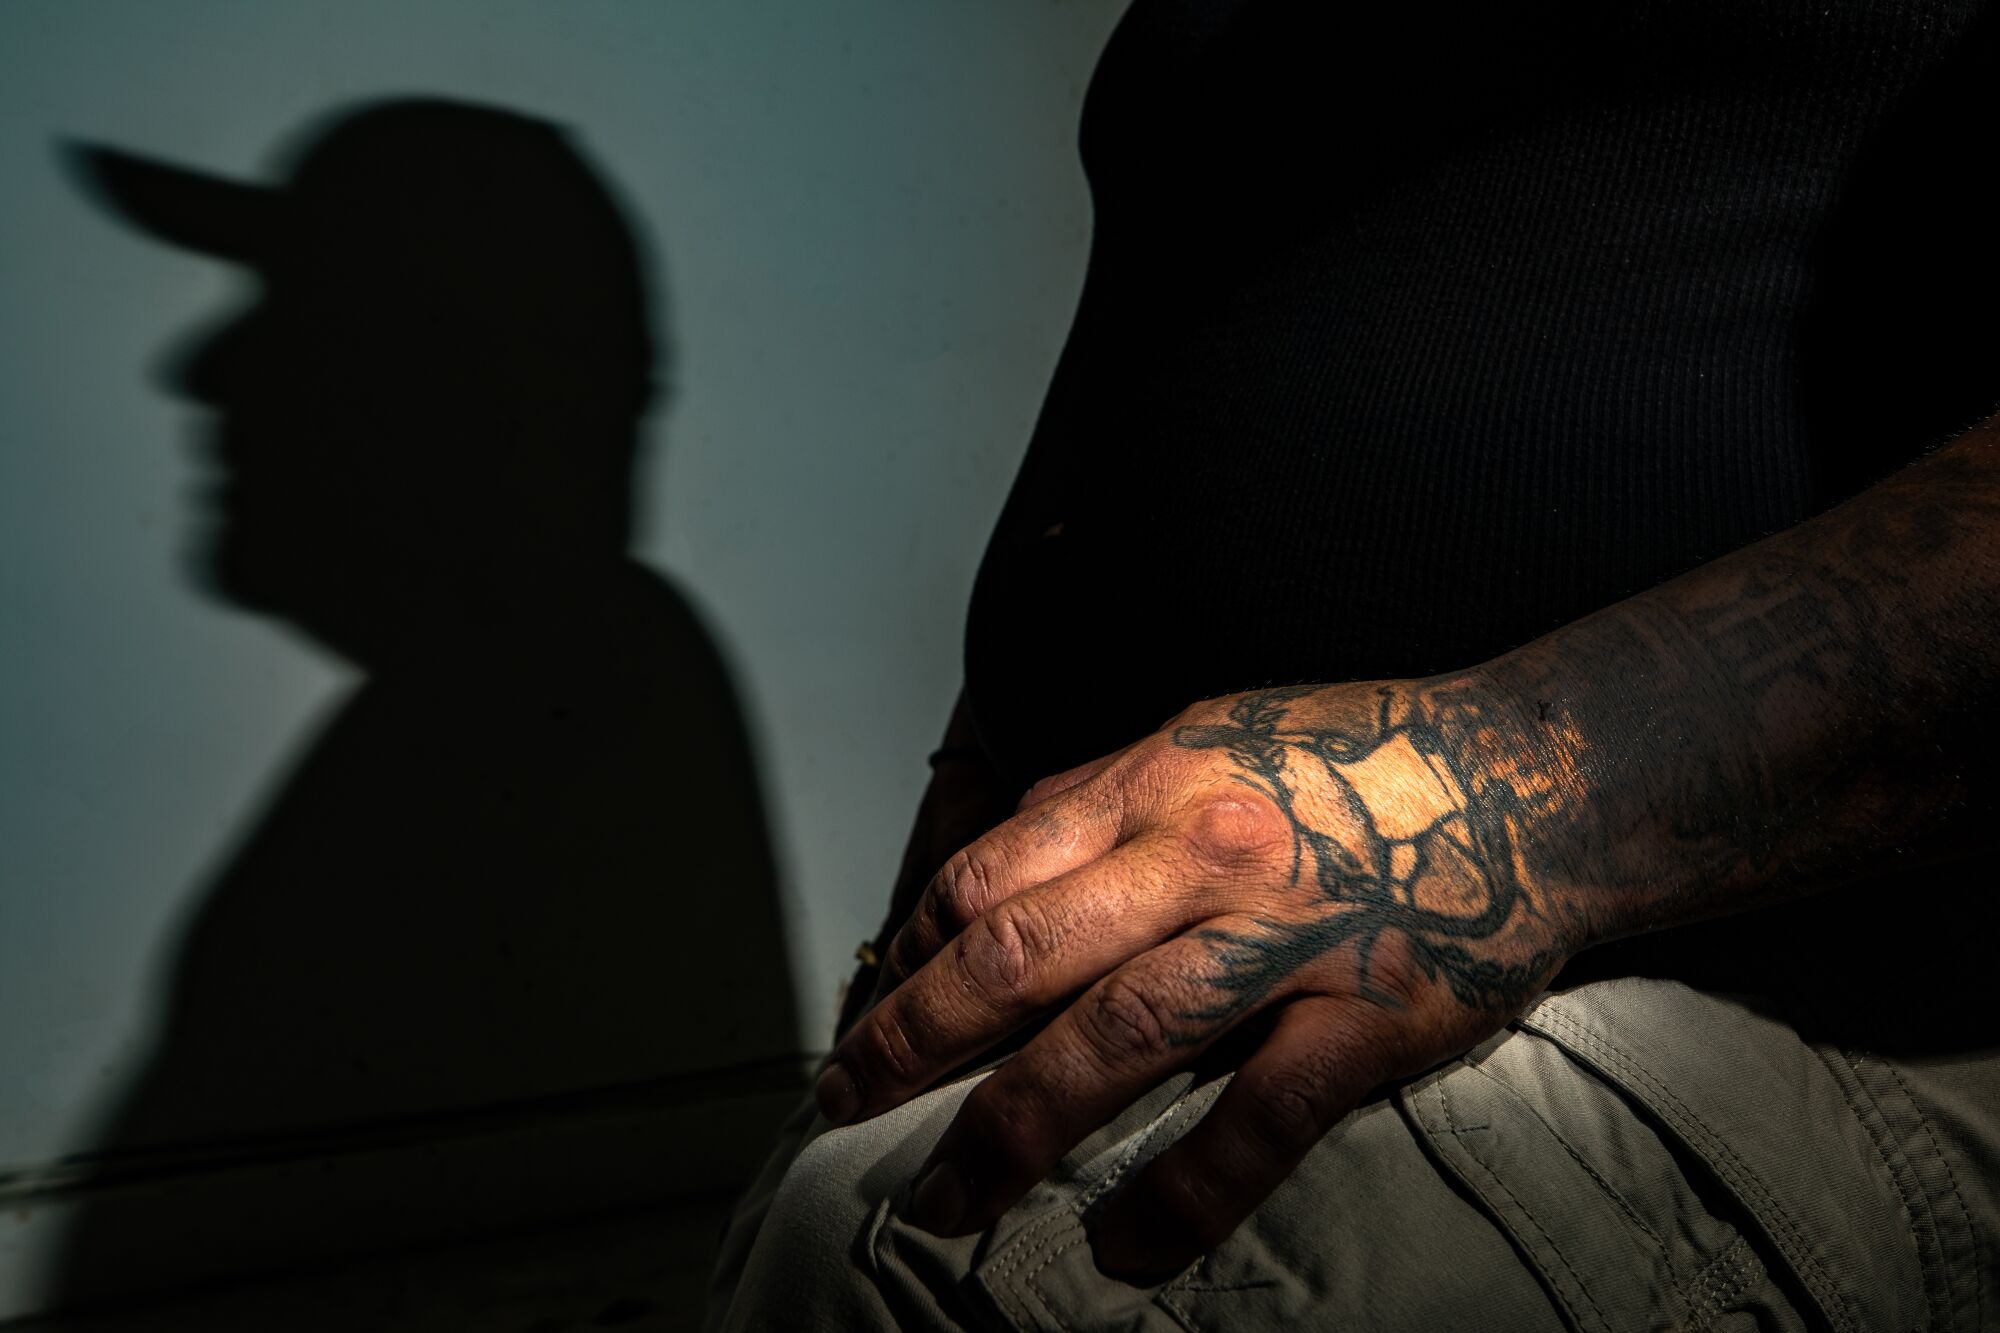 A close up frame of a tattooed hand resting on  a person's knee while his shadow is projected on the wall behind.